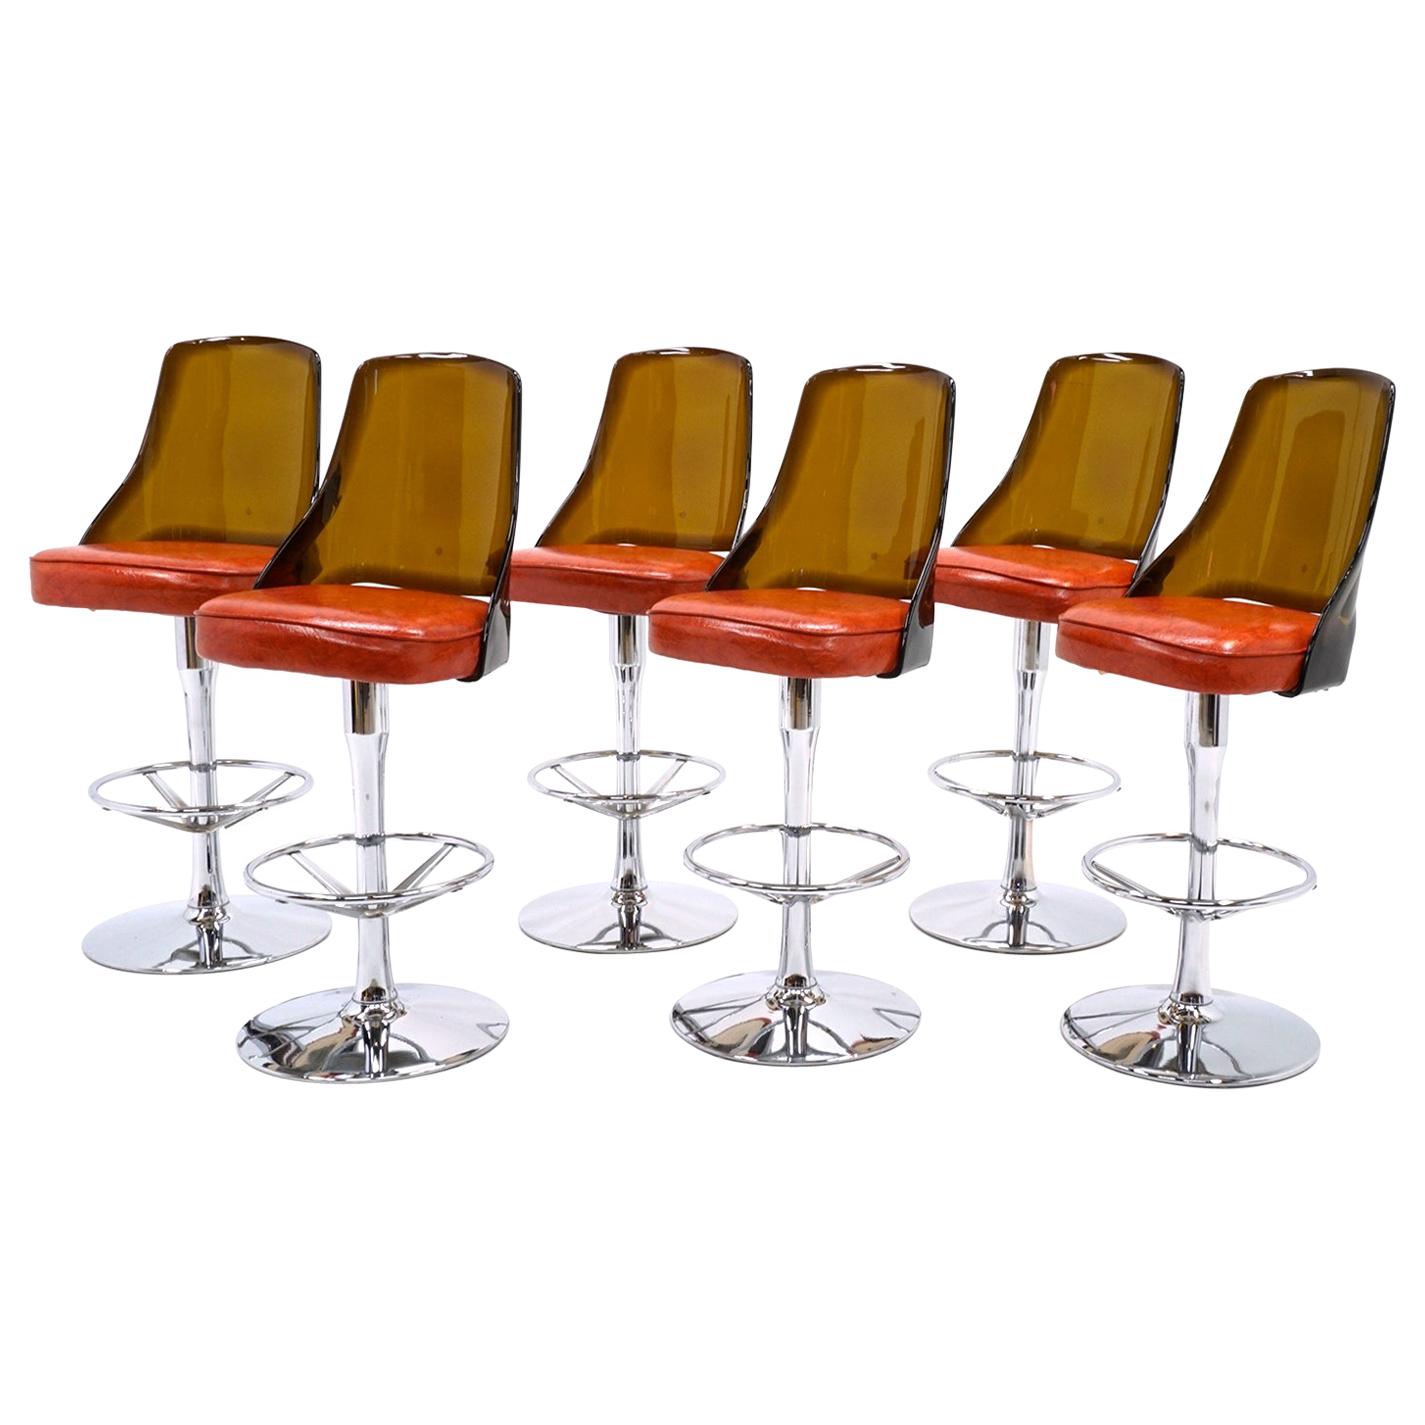 TWO AVAILABLE. of Chrome and Amber Lucite Bar Stools with Orange Vinyl Seats.